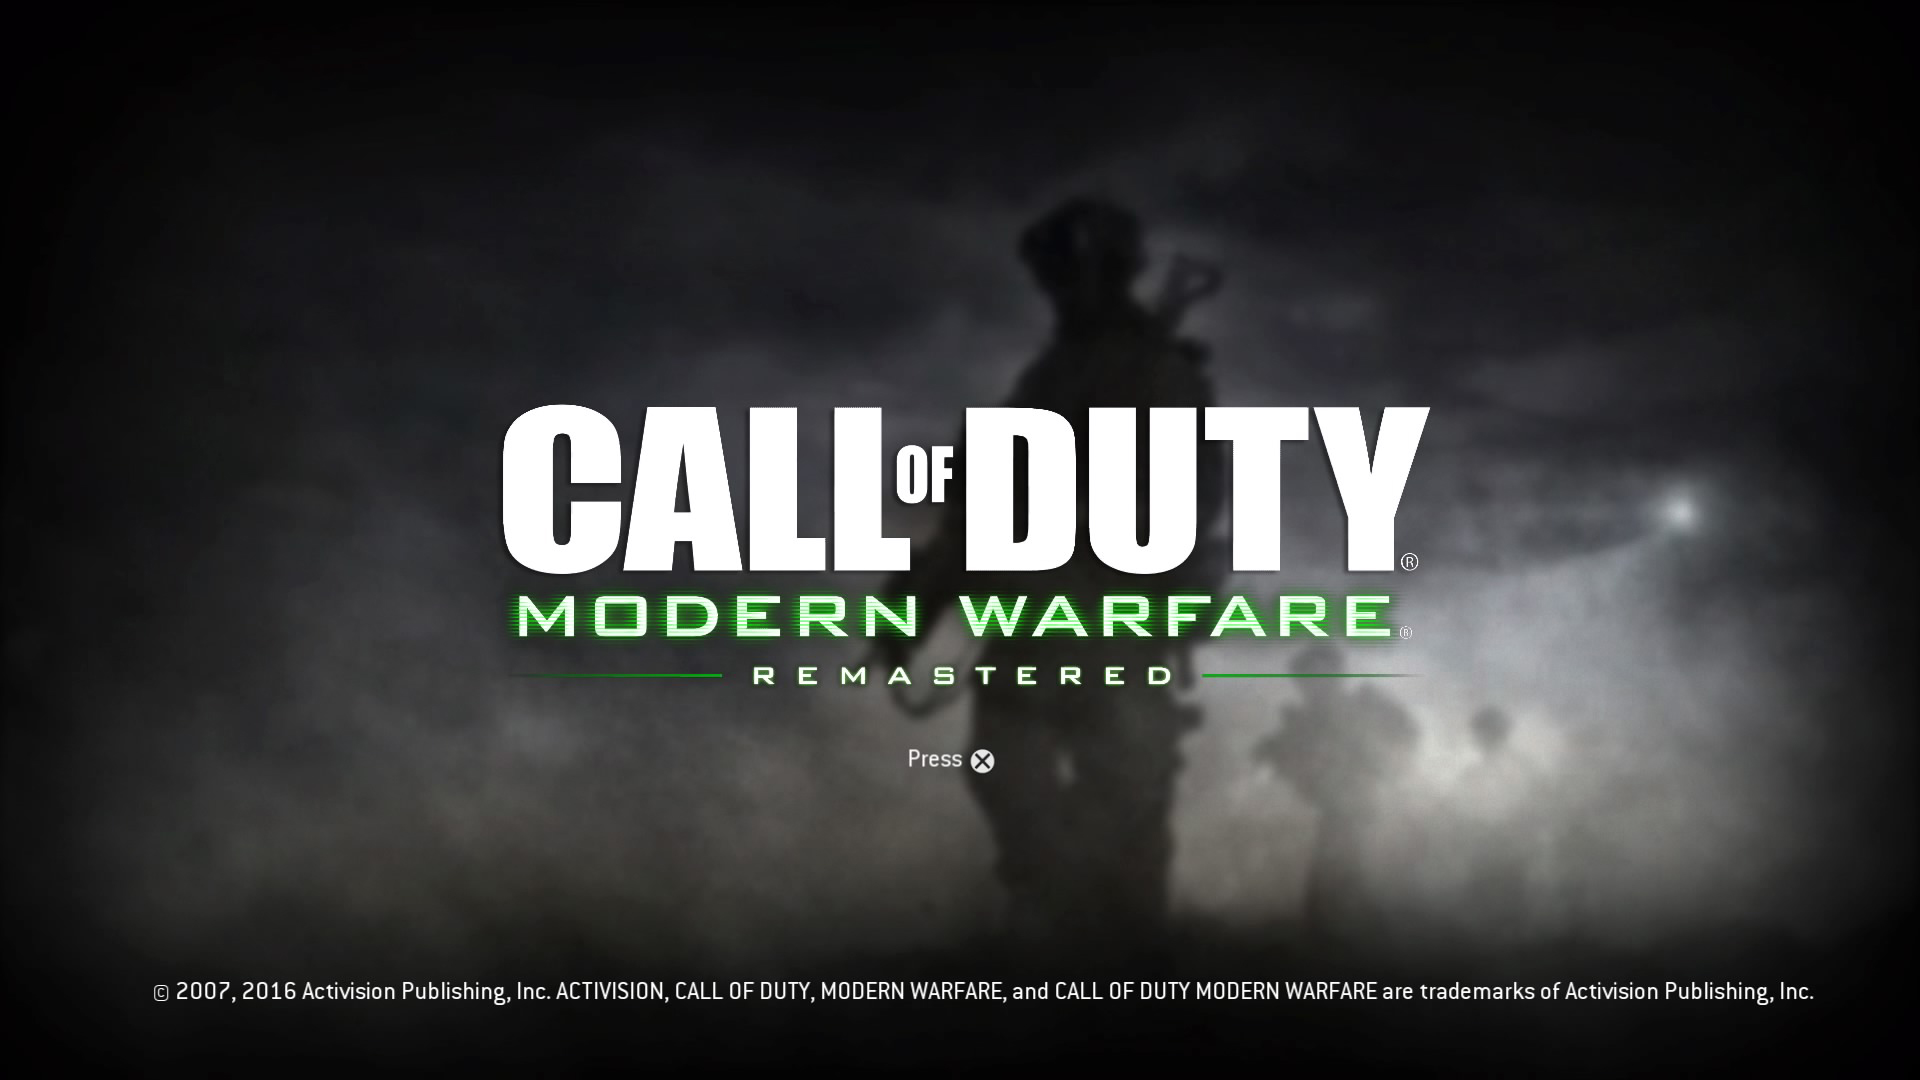 Call of Duty: Modern Warfare Remastered PS4 title